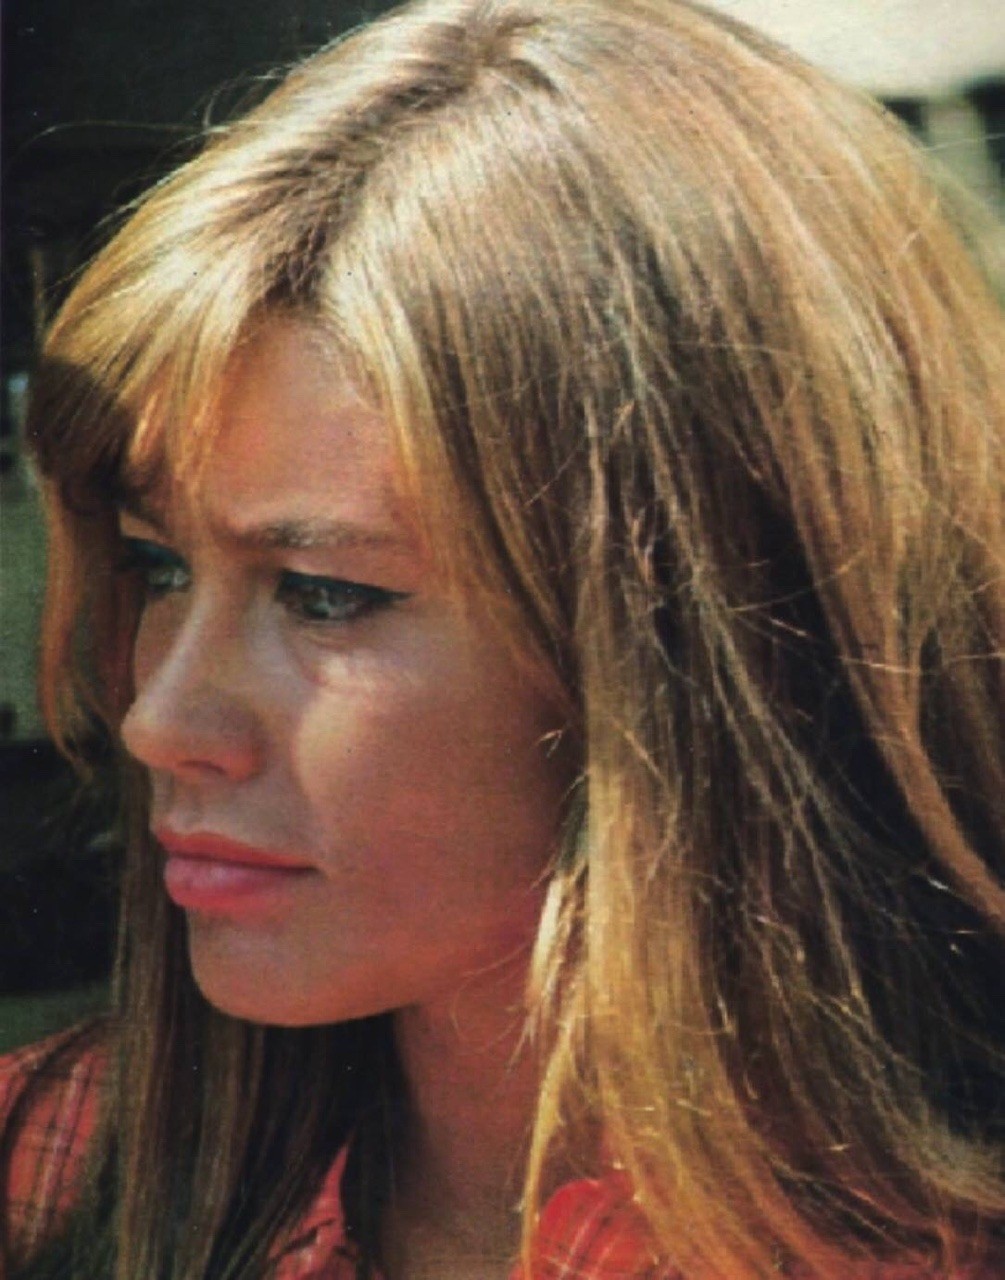 A photo of Francoise Hardy from the set of the movie Grand Prix, Monza and Milan, Italy, 1966.